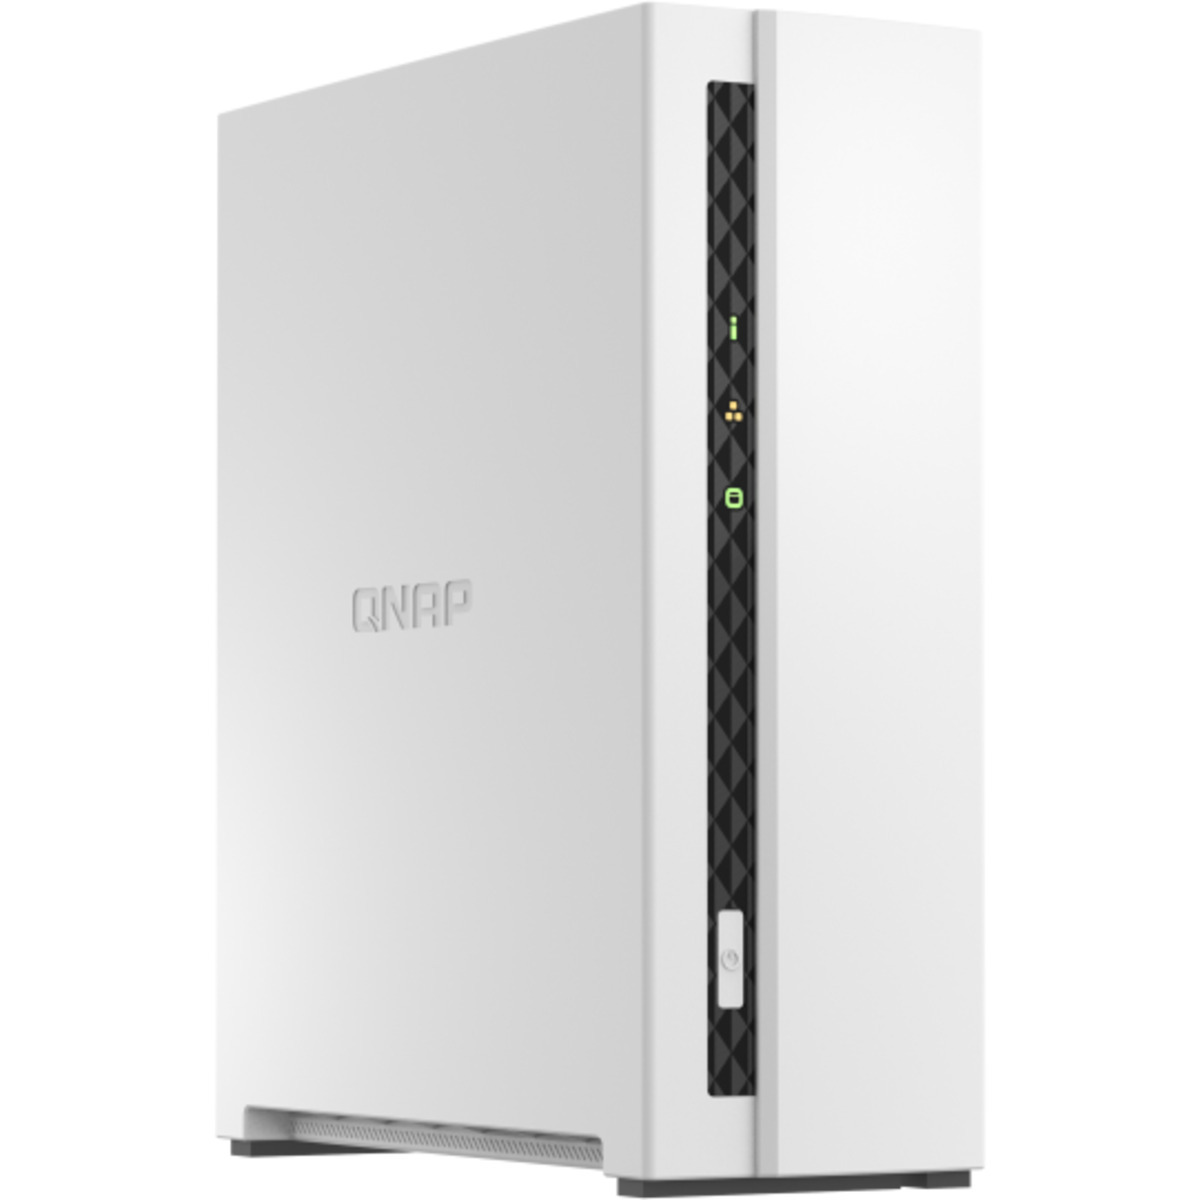 buy QNAP TS-133 1tb Desktop NAS - Network Attached Storage Device 1x1000gb Samsung 870 EVO MZ-77E1T0BAM 2.5 560/530MB/s SATA 6Gb/s SSD CONSUMER Class Drives Installed - Burn-In Tested - nas headquarters buy network attached storage server device das new raid-5 free shipping usa spring sale TS-133